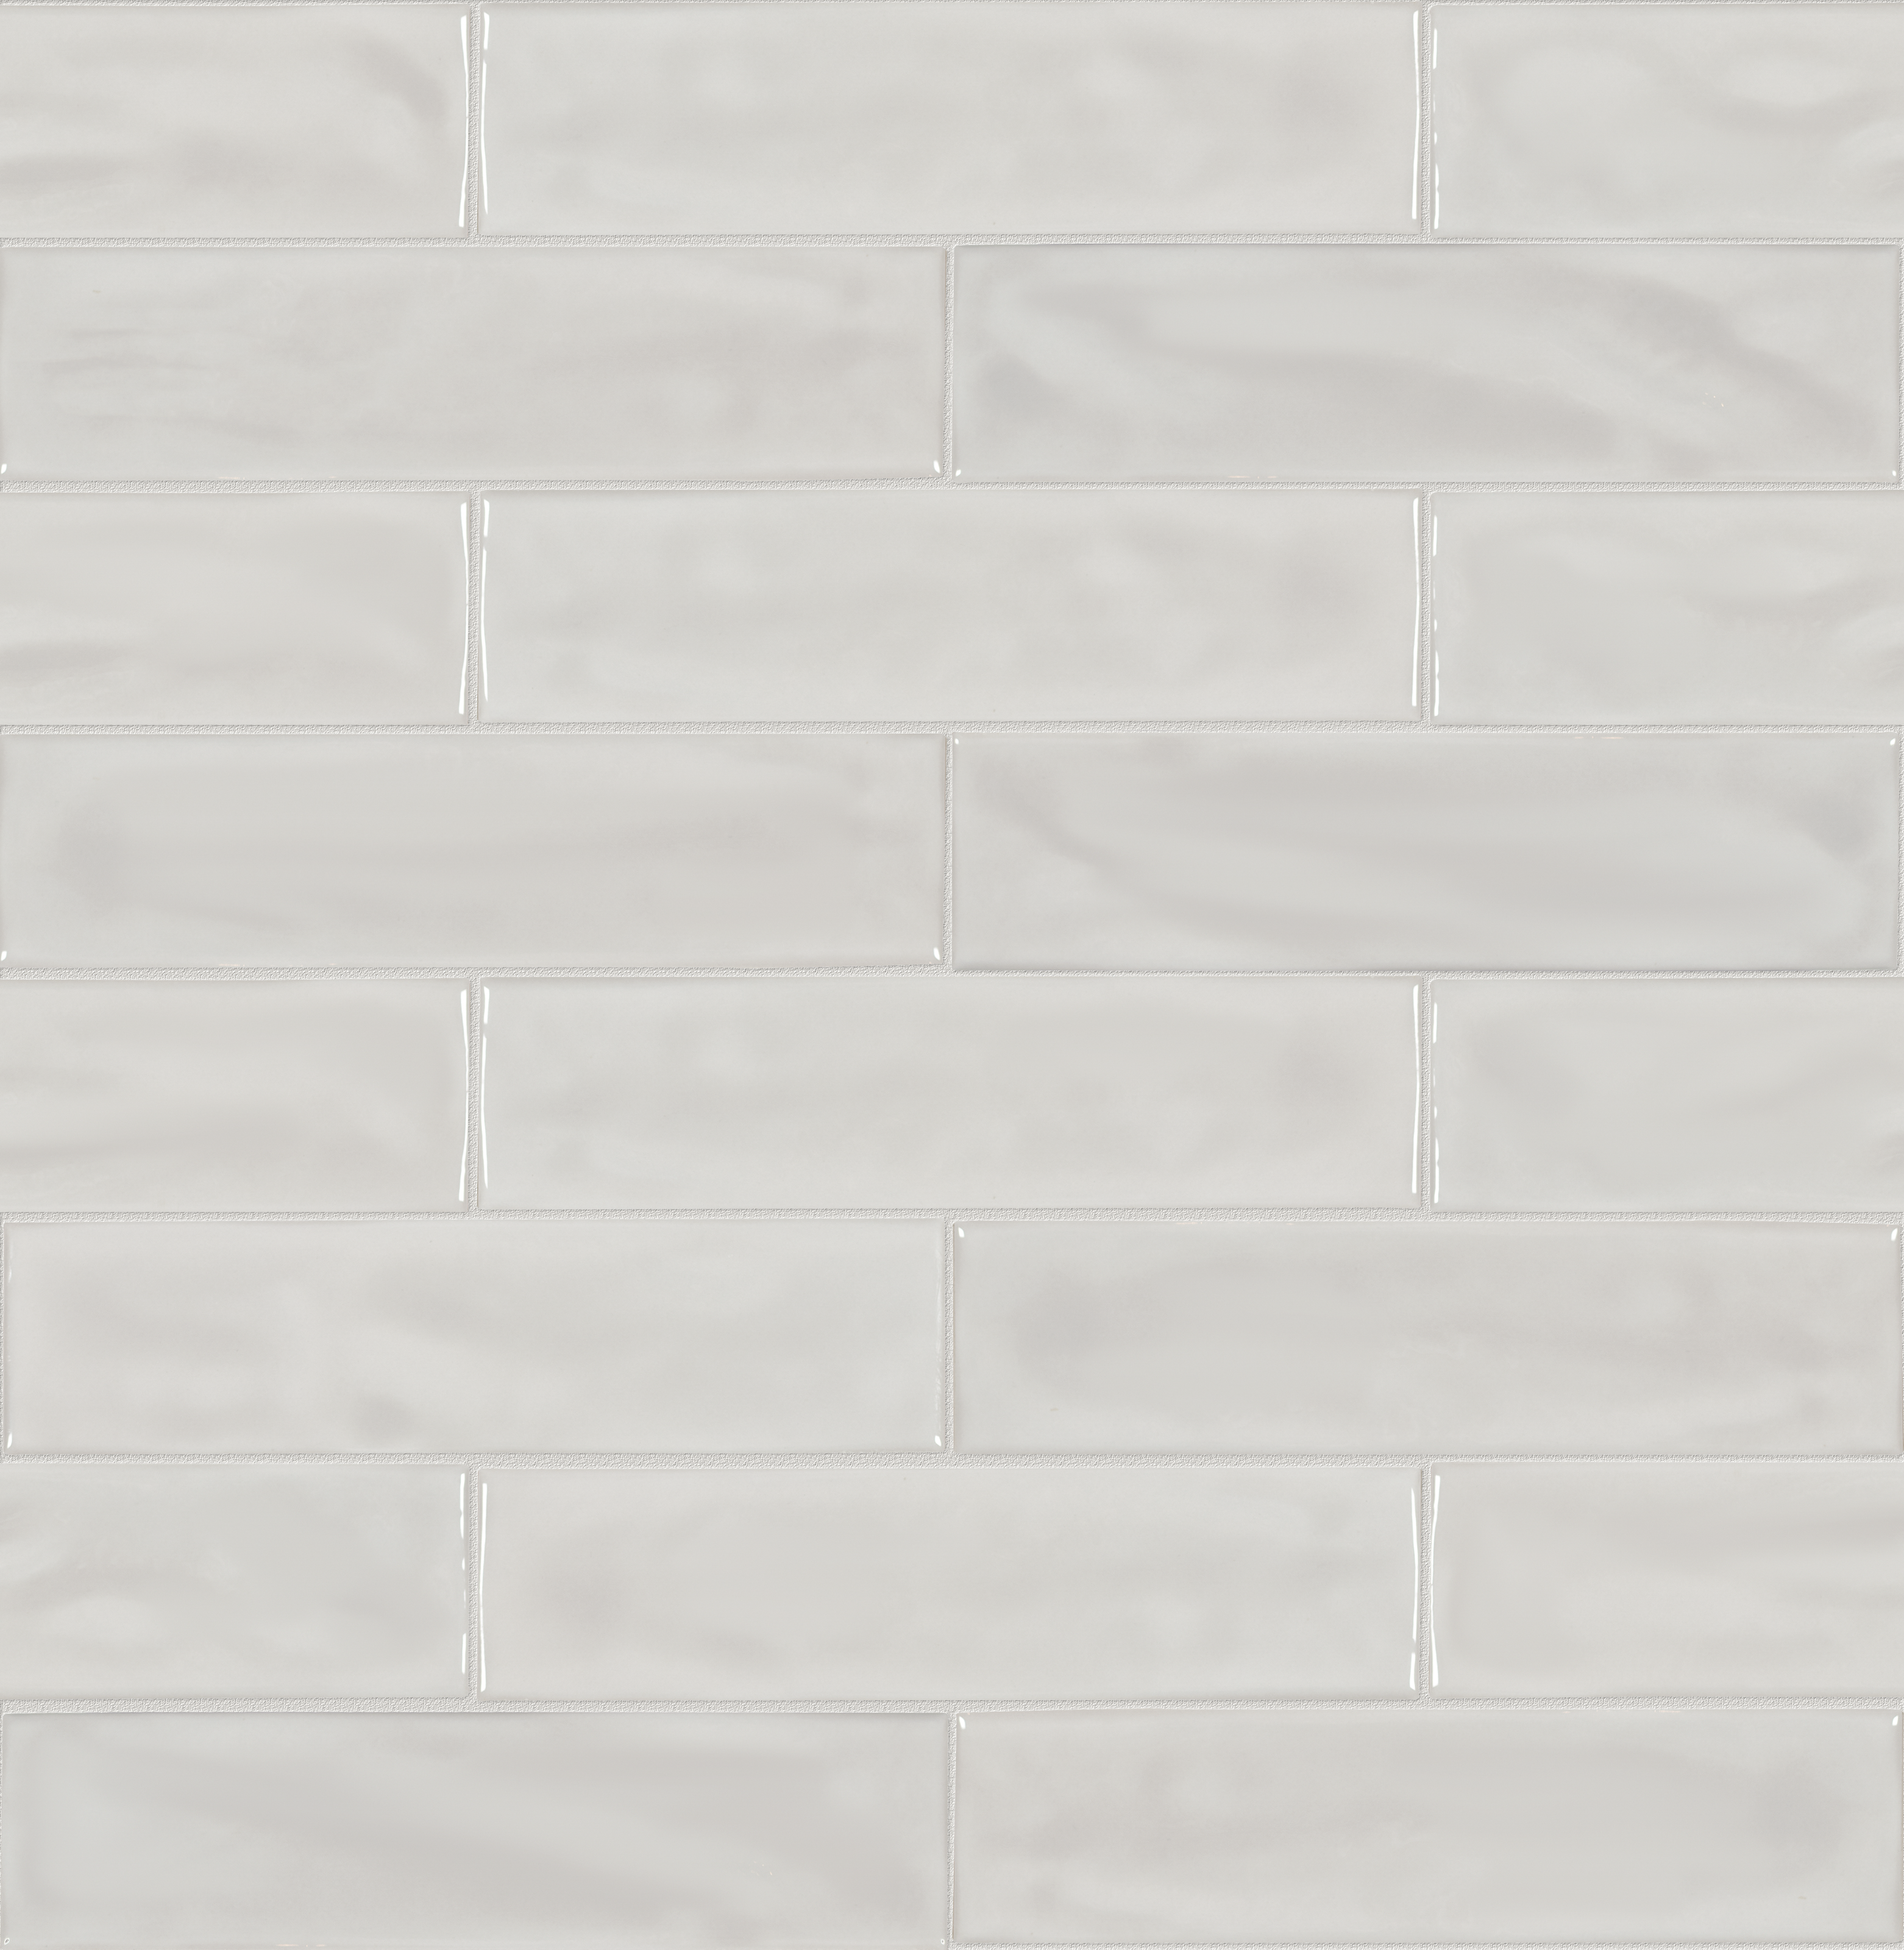 mist pattern glazed ceramic field tile from marlow anatolia collection distributed by surface group international glossy finish pressed edge 3x12 rectangle shape